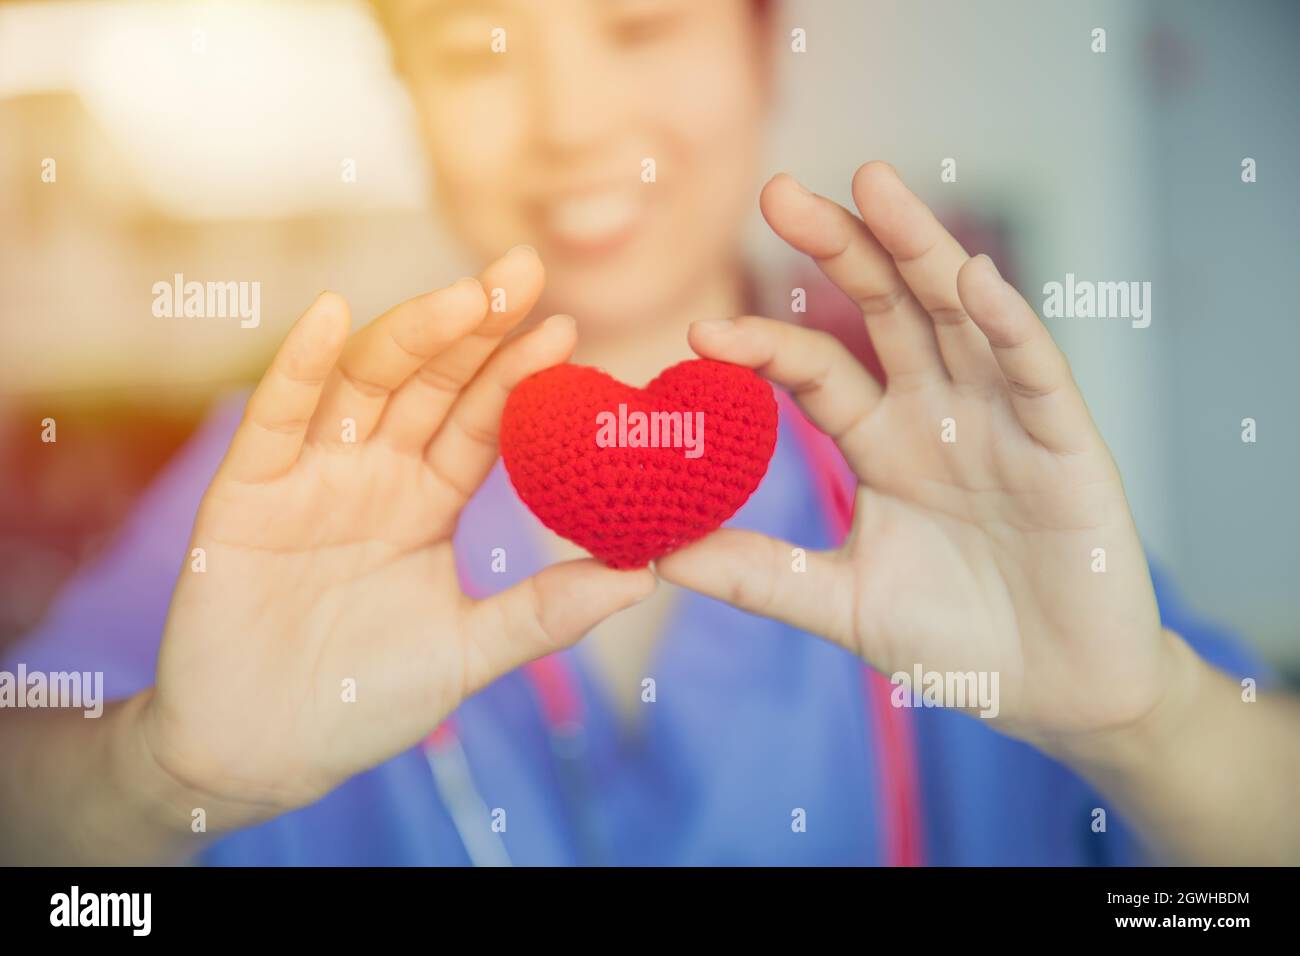 nurse sharing love red heart for health care giving medical help and donation together concept Stock Photo